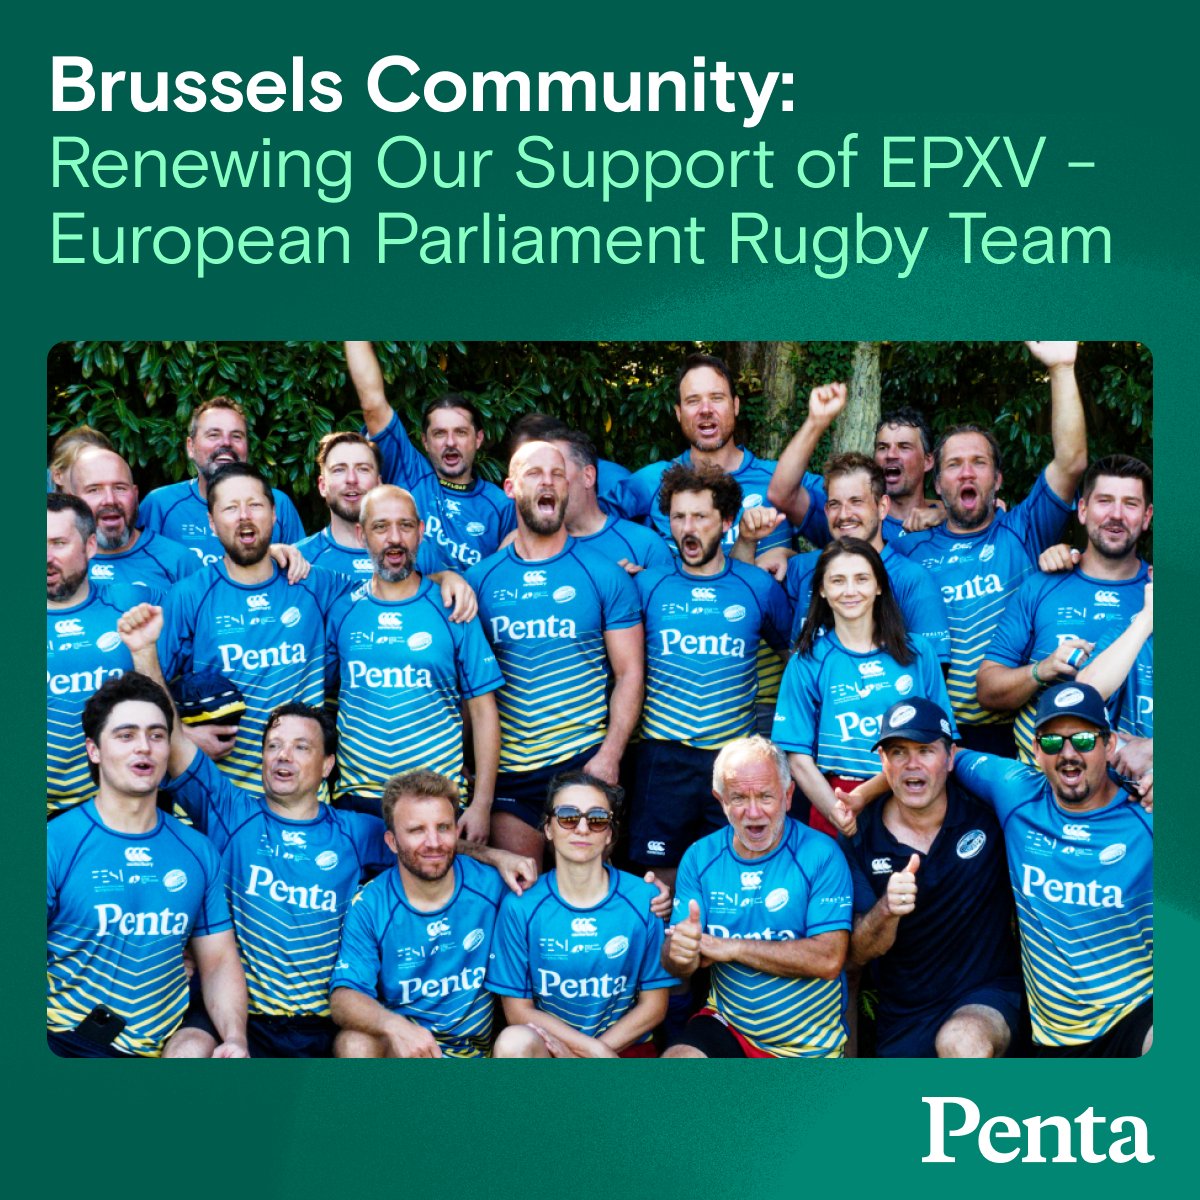 Penta are delighted to announce our continued support for the @Europarl_Rugby - the European Parliament Rugby Team! 🇪🇺🏉 👏 The season for the team kicks off this weekend with their first challenge match. Best of luck to the team! #CommunitySupport #GivingBack